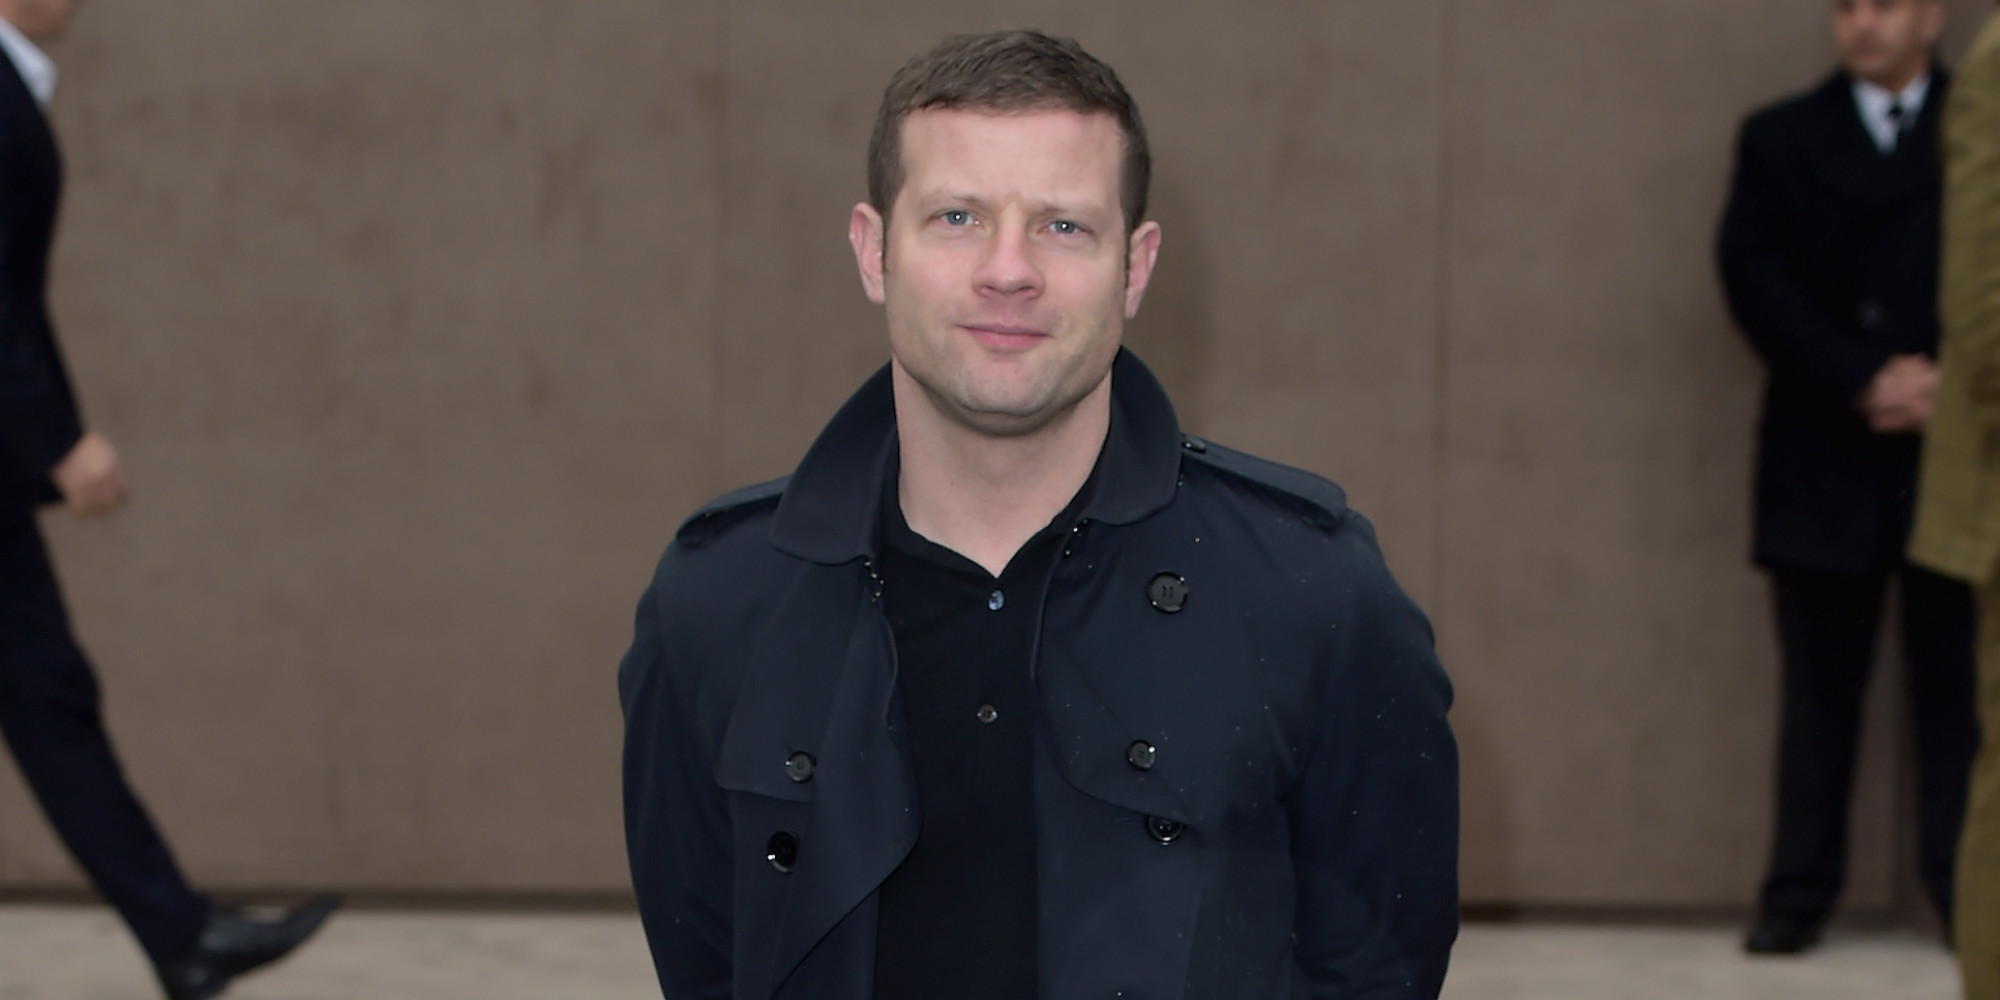 ‘X Factor' Presenter Dermot O'Leary 'Axed' - Could He Move To ‘Top Gear ...